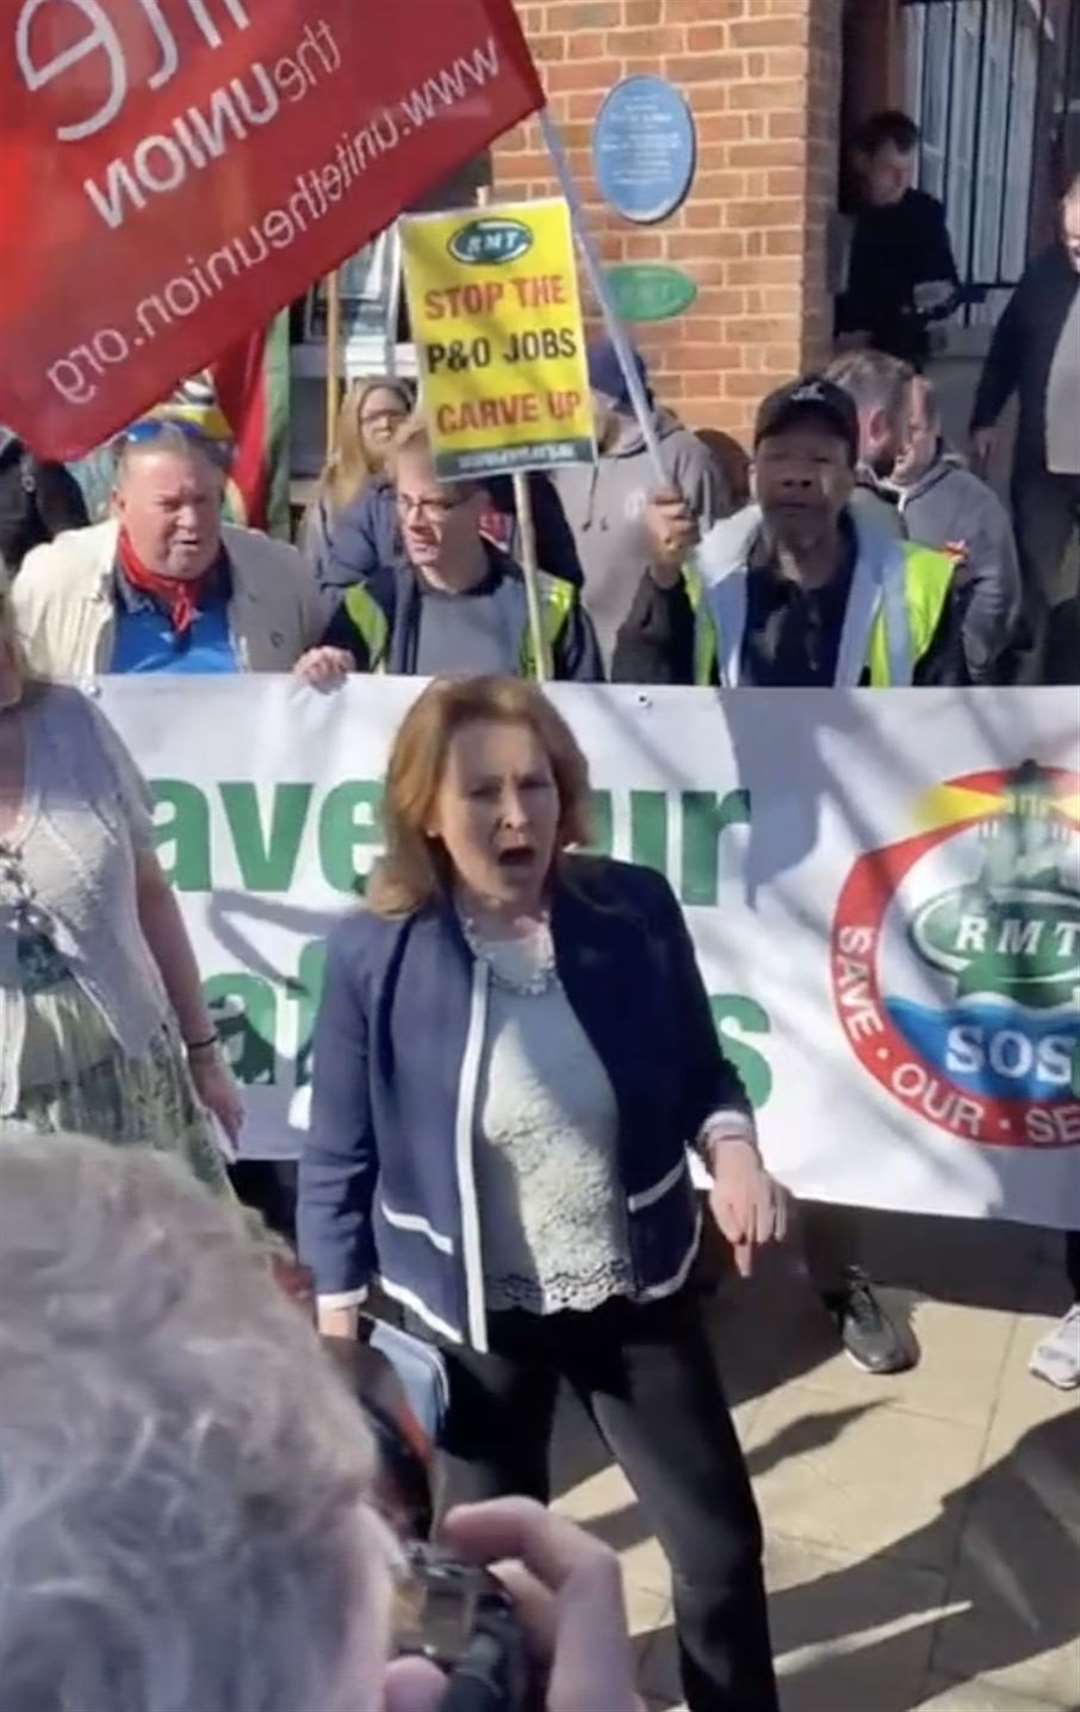 Natalie Elphicke was heckled at the protest